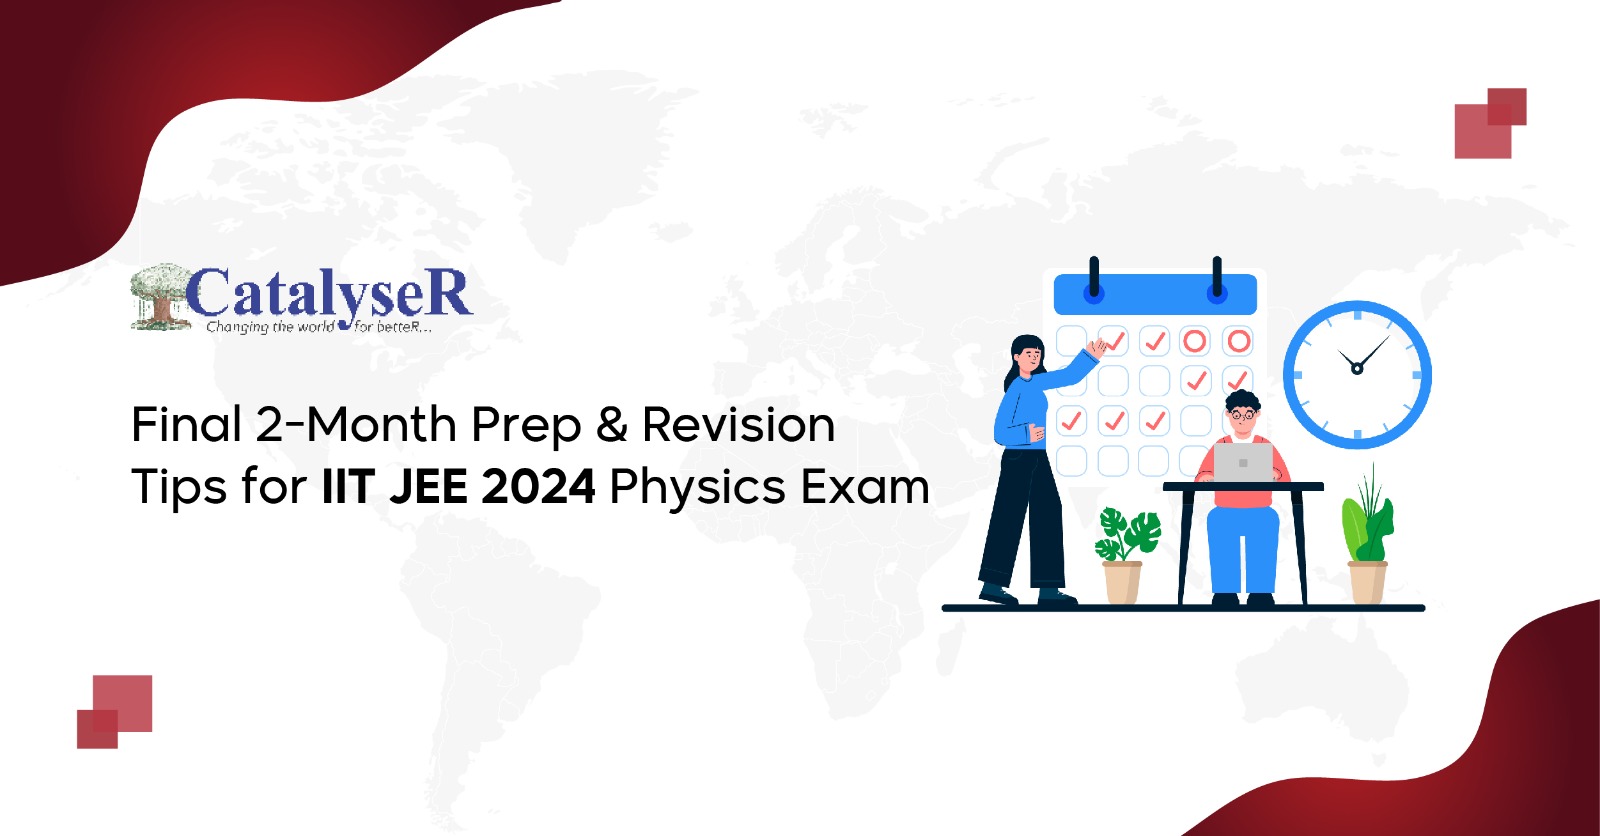 Final 2-Month Prep & Revision Tips for IIT JEE 2024 Physics Exam